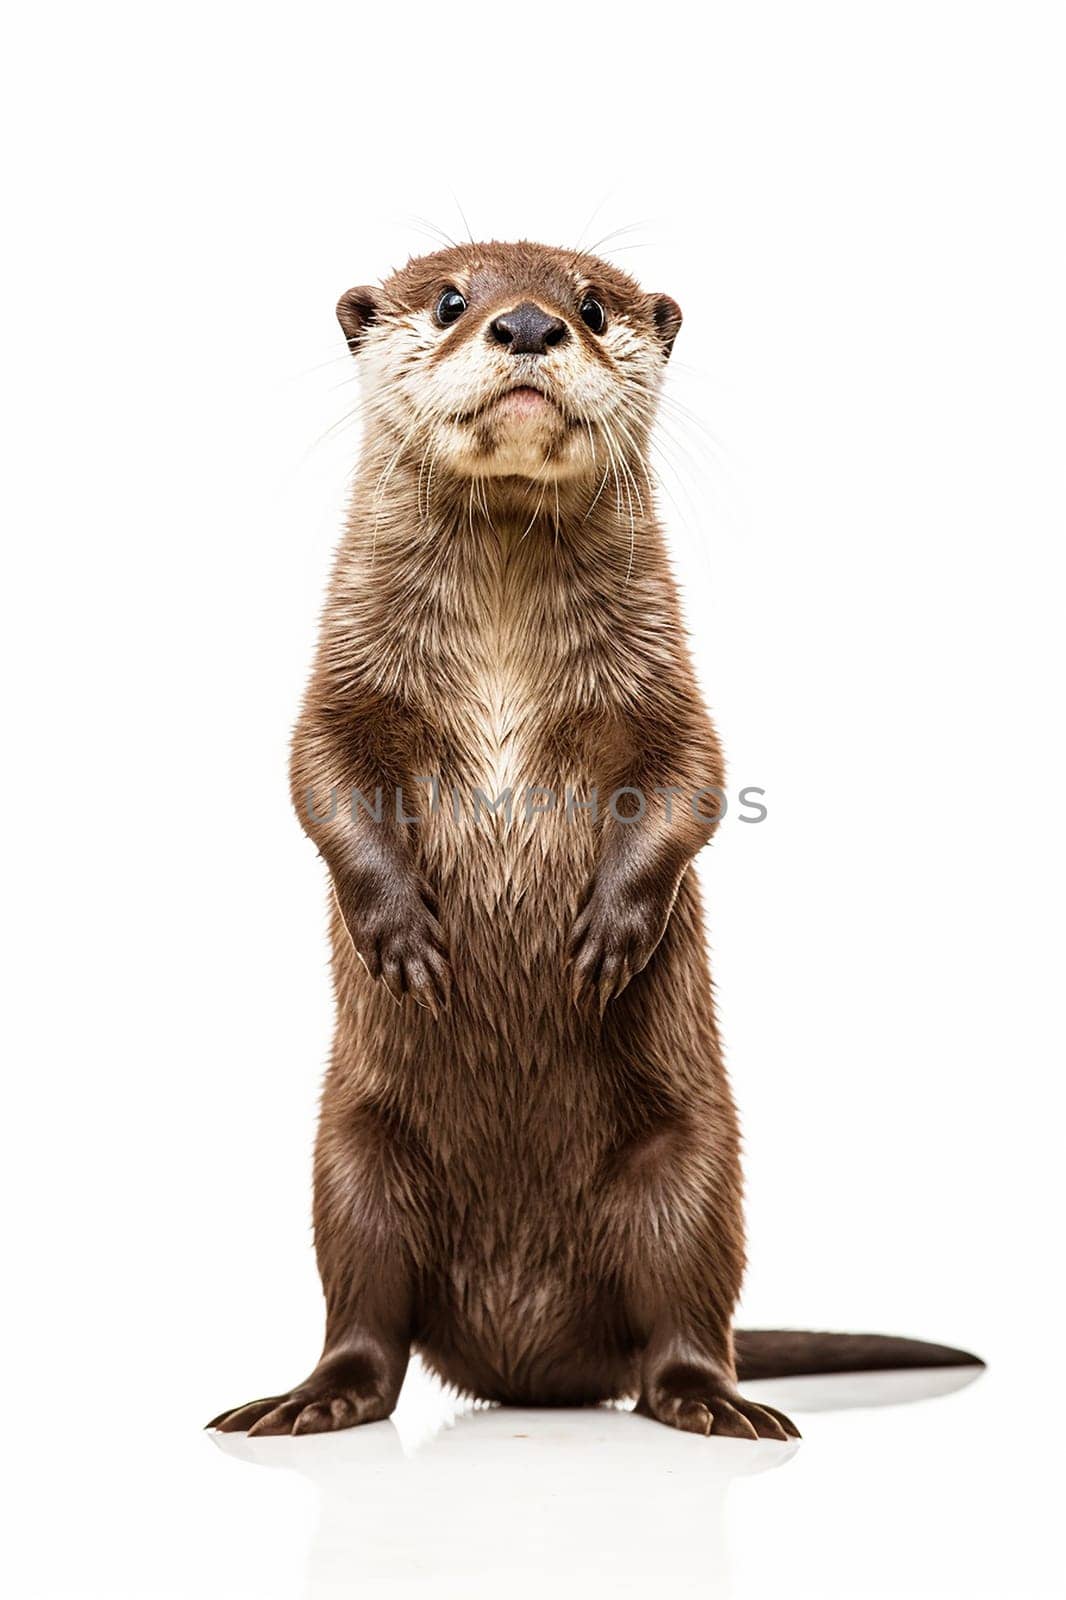 A cute and little otter photo on white background